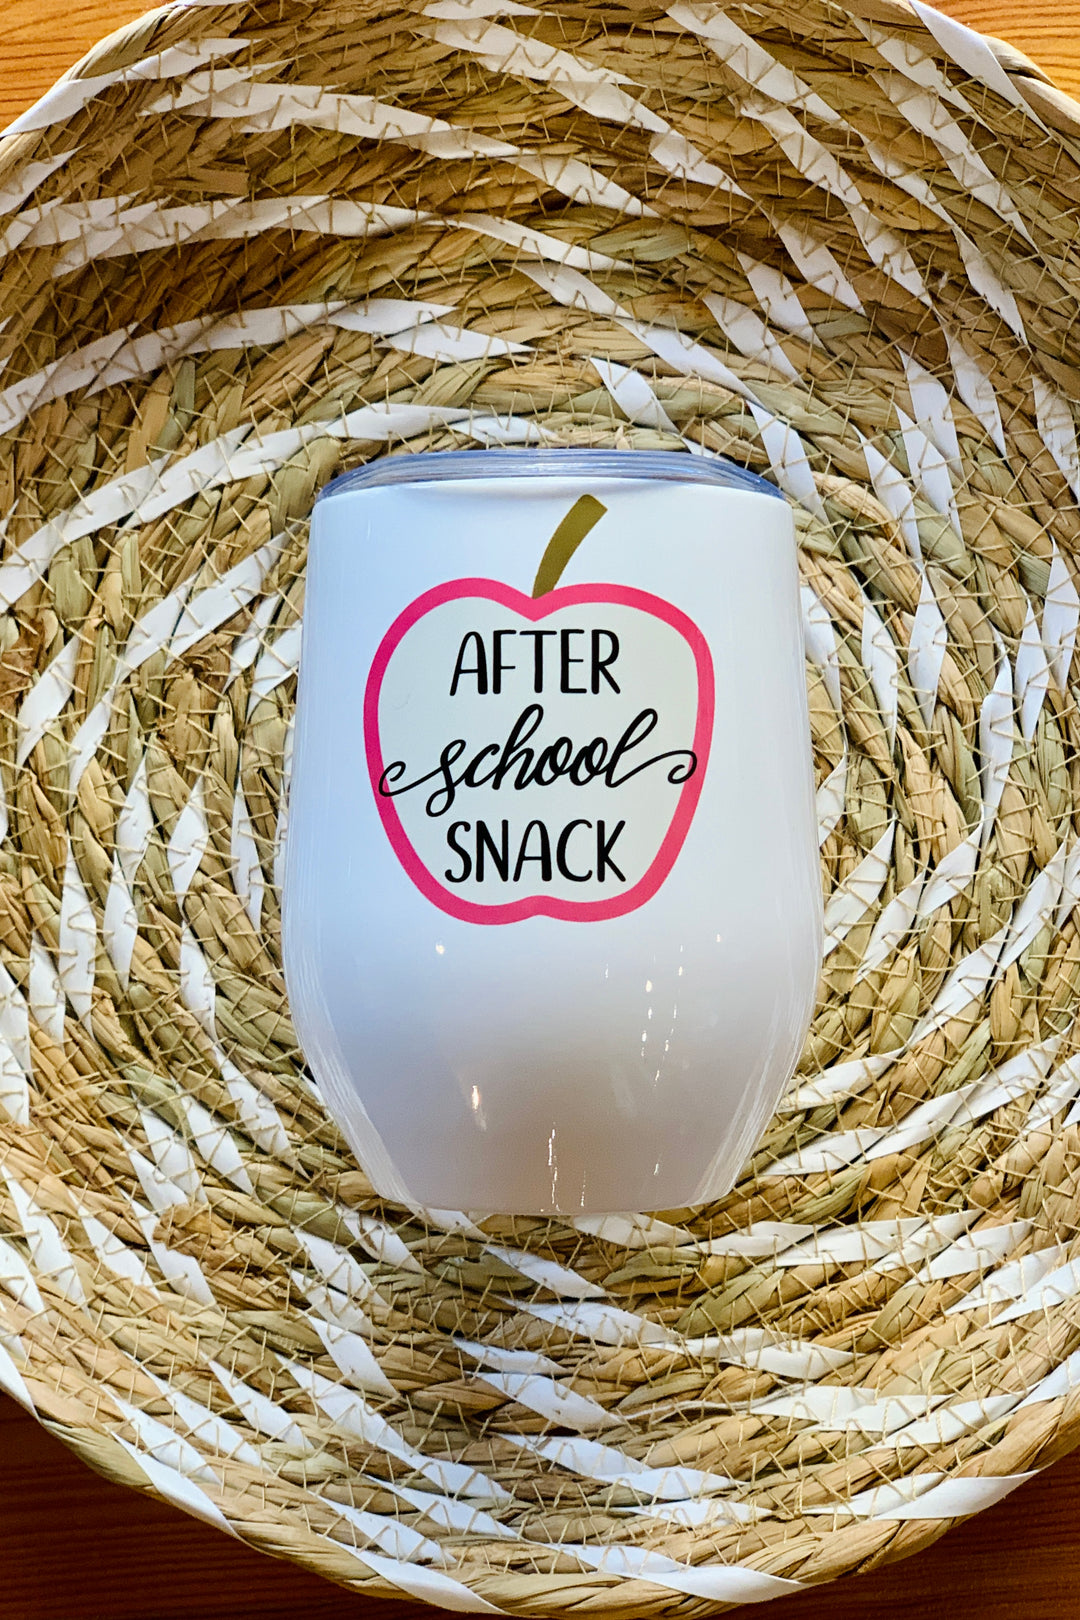 After School Snack Wine Cup